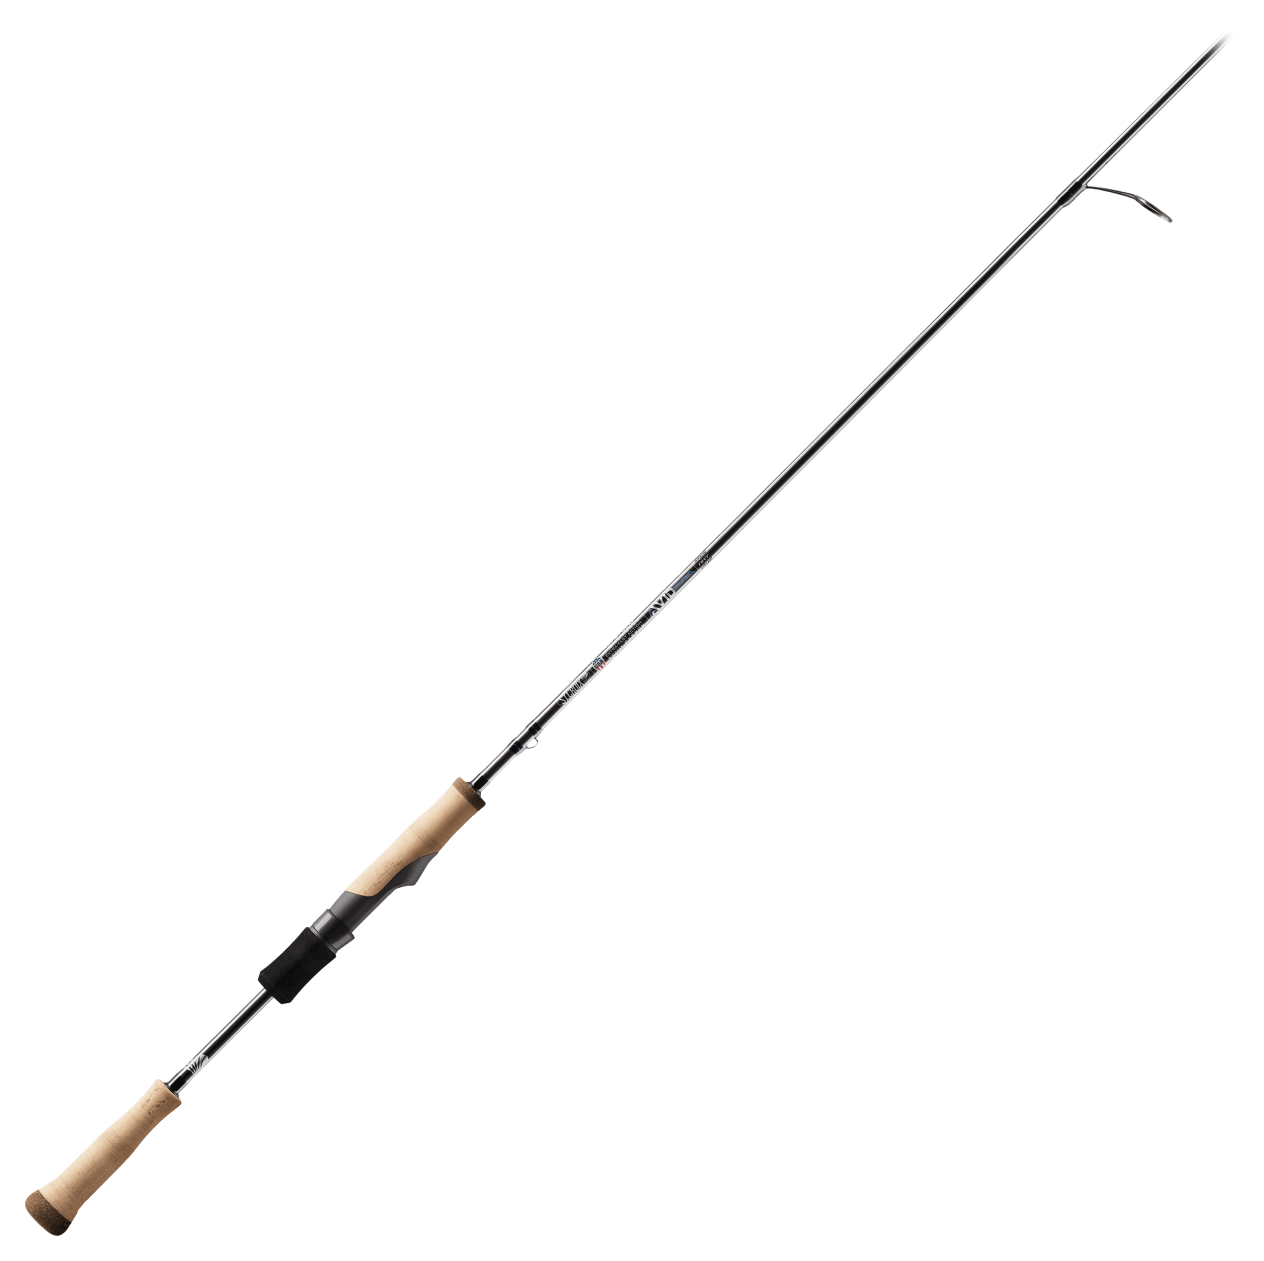 St. Croix Avid Panfish Spinning Rod - Hamilton Bait and Tackle